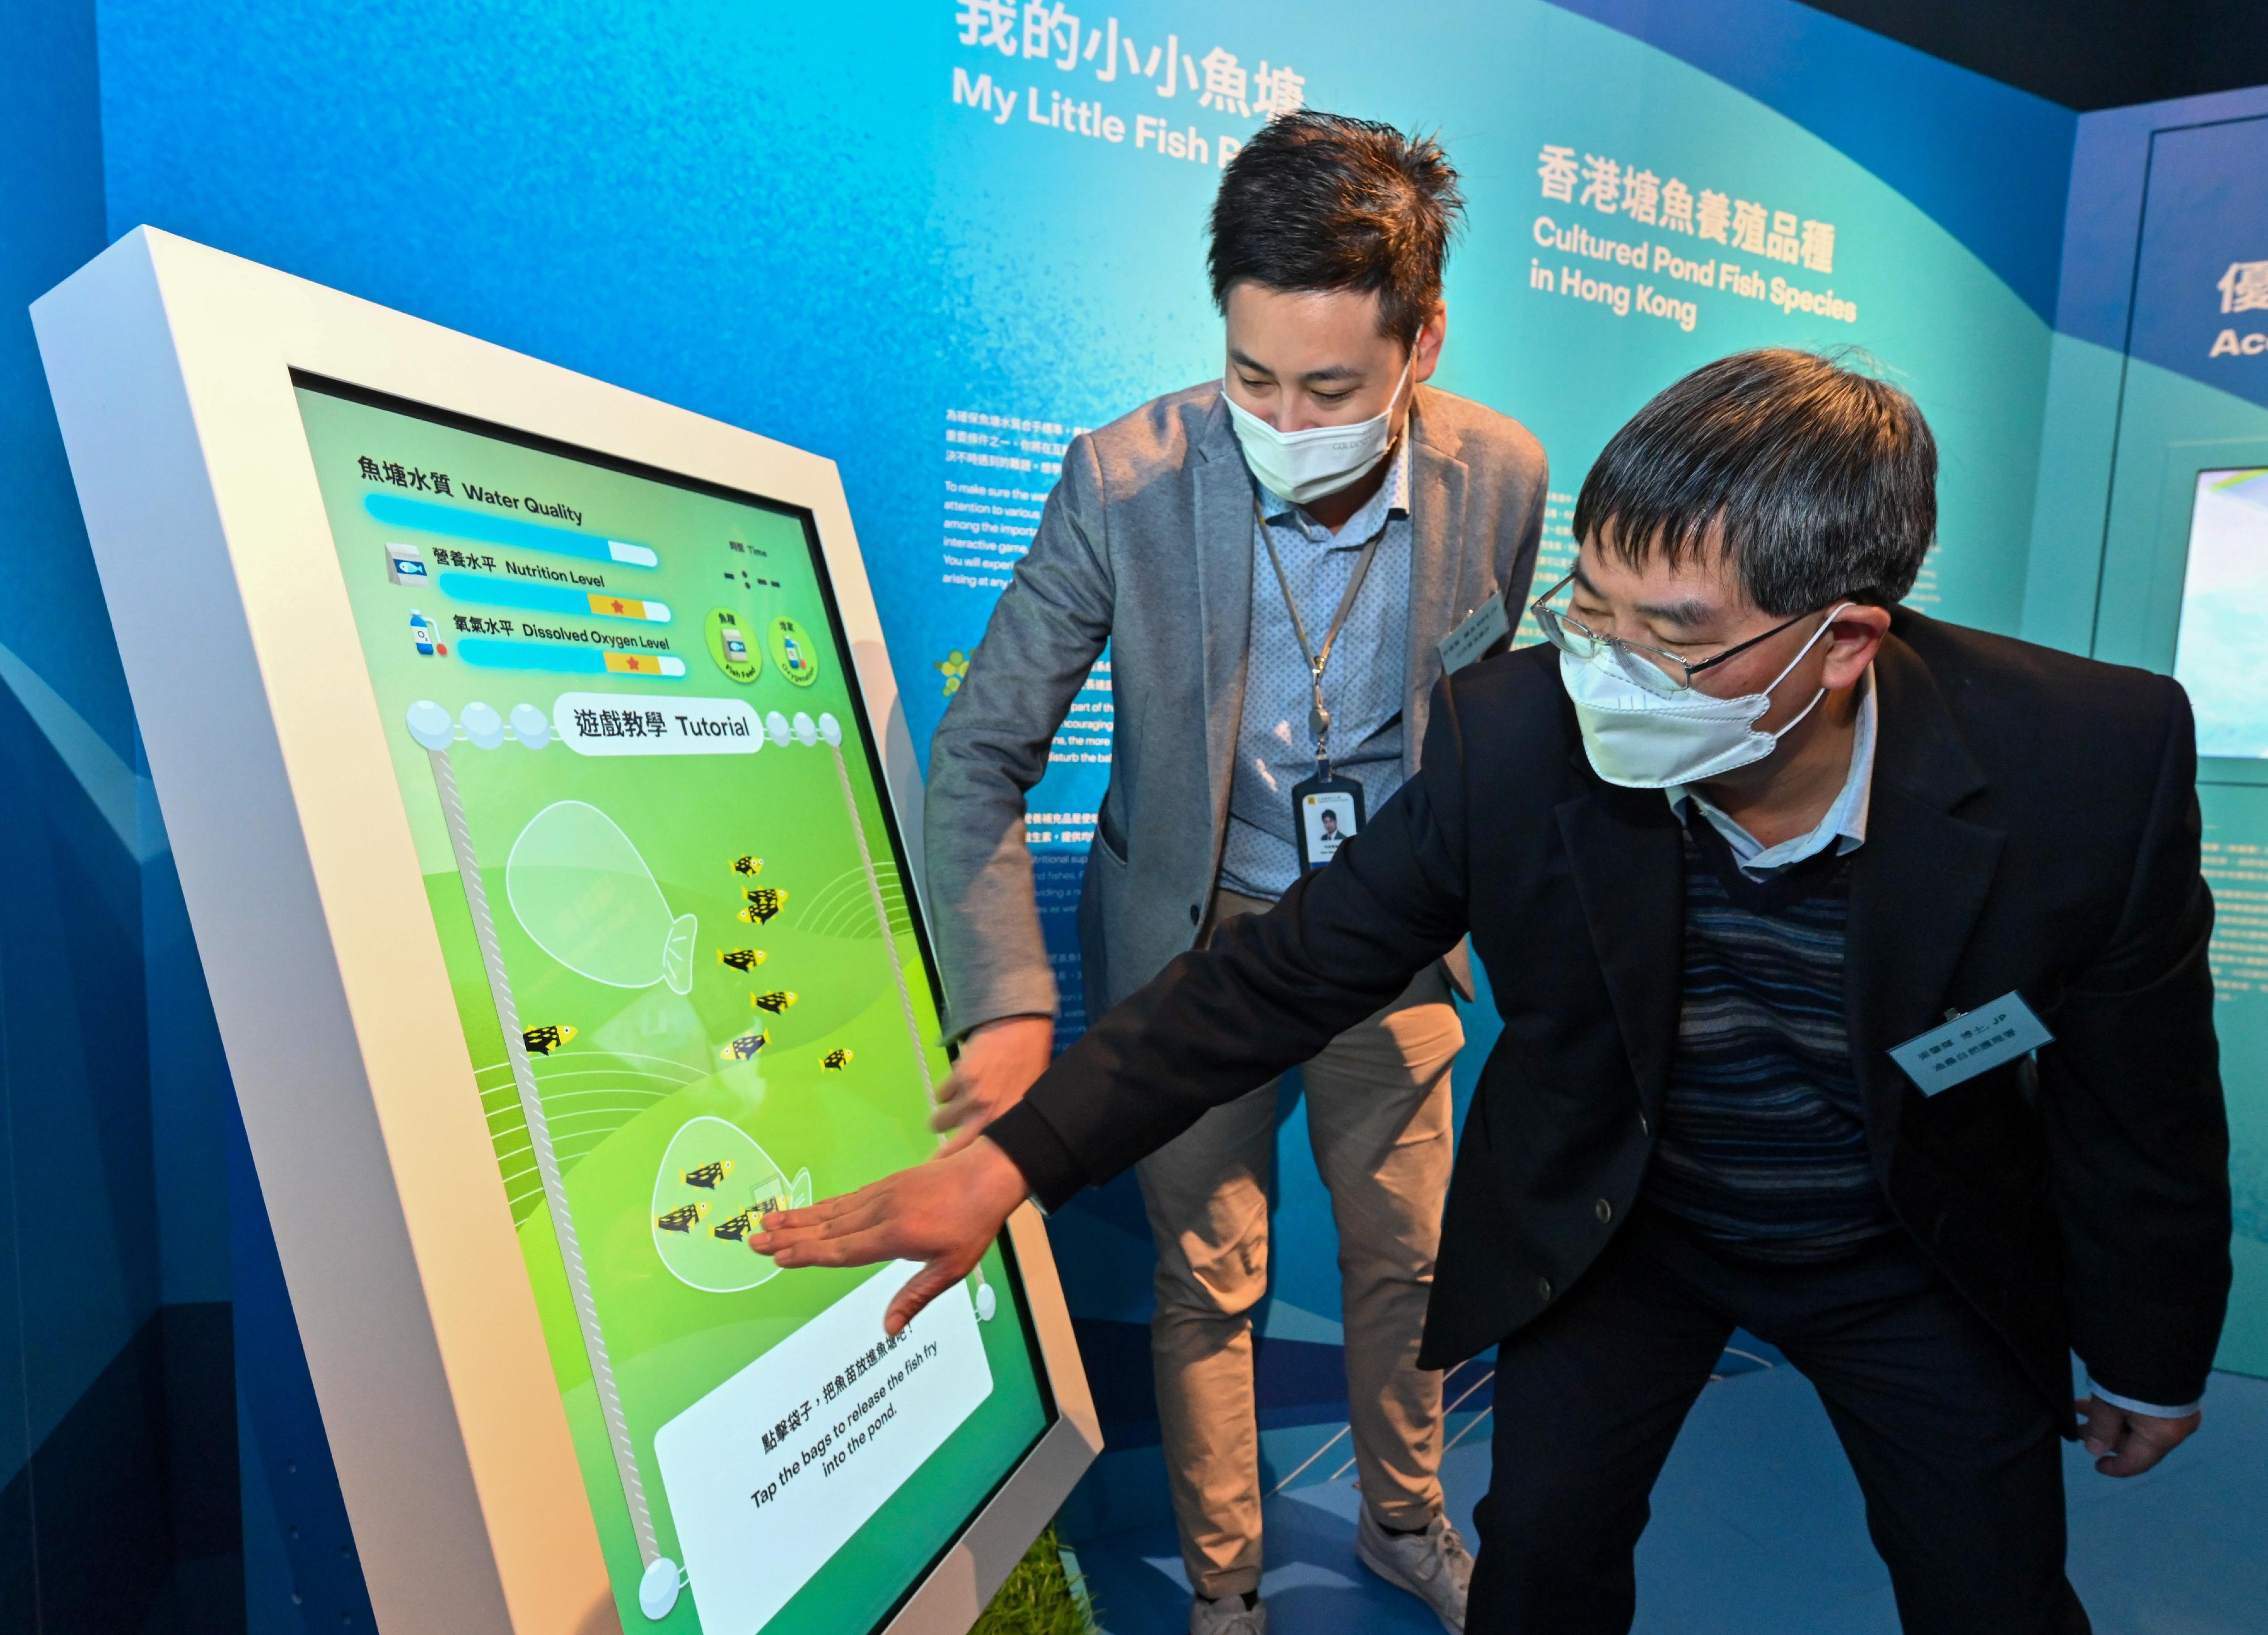 The Fisheries Hall located at the Lions Nature Education Centre at Tsiu Hang, Sai Kung, reopened today (December 16) upon completion of its revamp. Photo shows the Director of Agriculture, Fisheries and Conservation, Dr Leung Siu-fai (right), and Legislative Council Member Mr Steven Ho playing the multimedia interactive game "My Little Fish Pond".